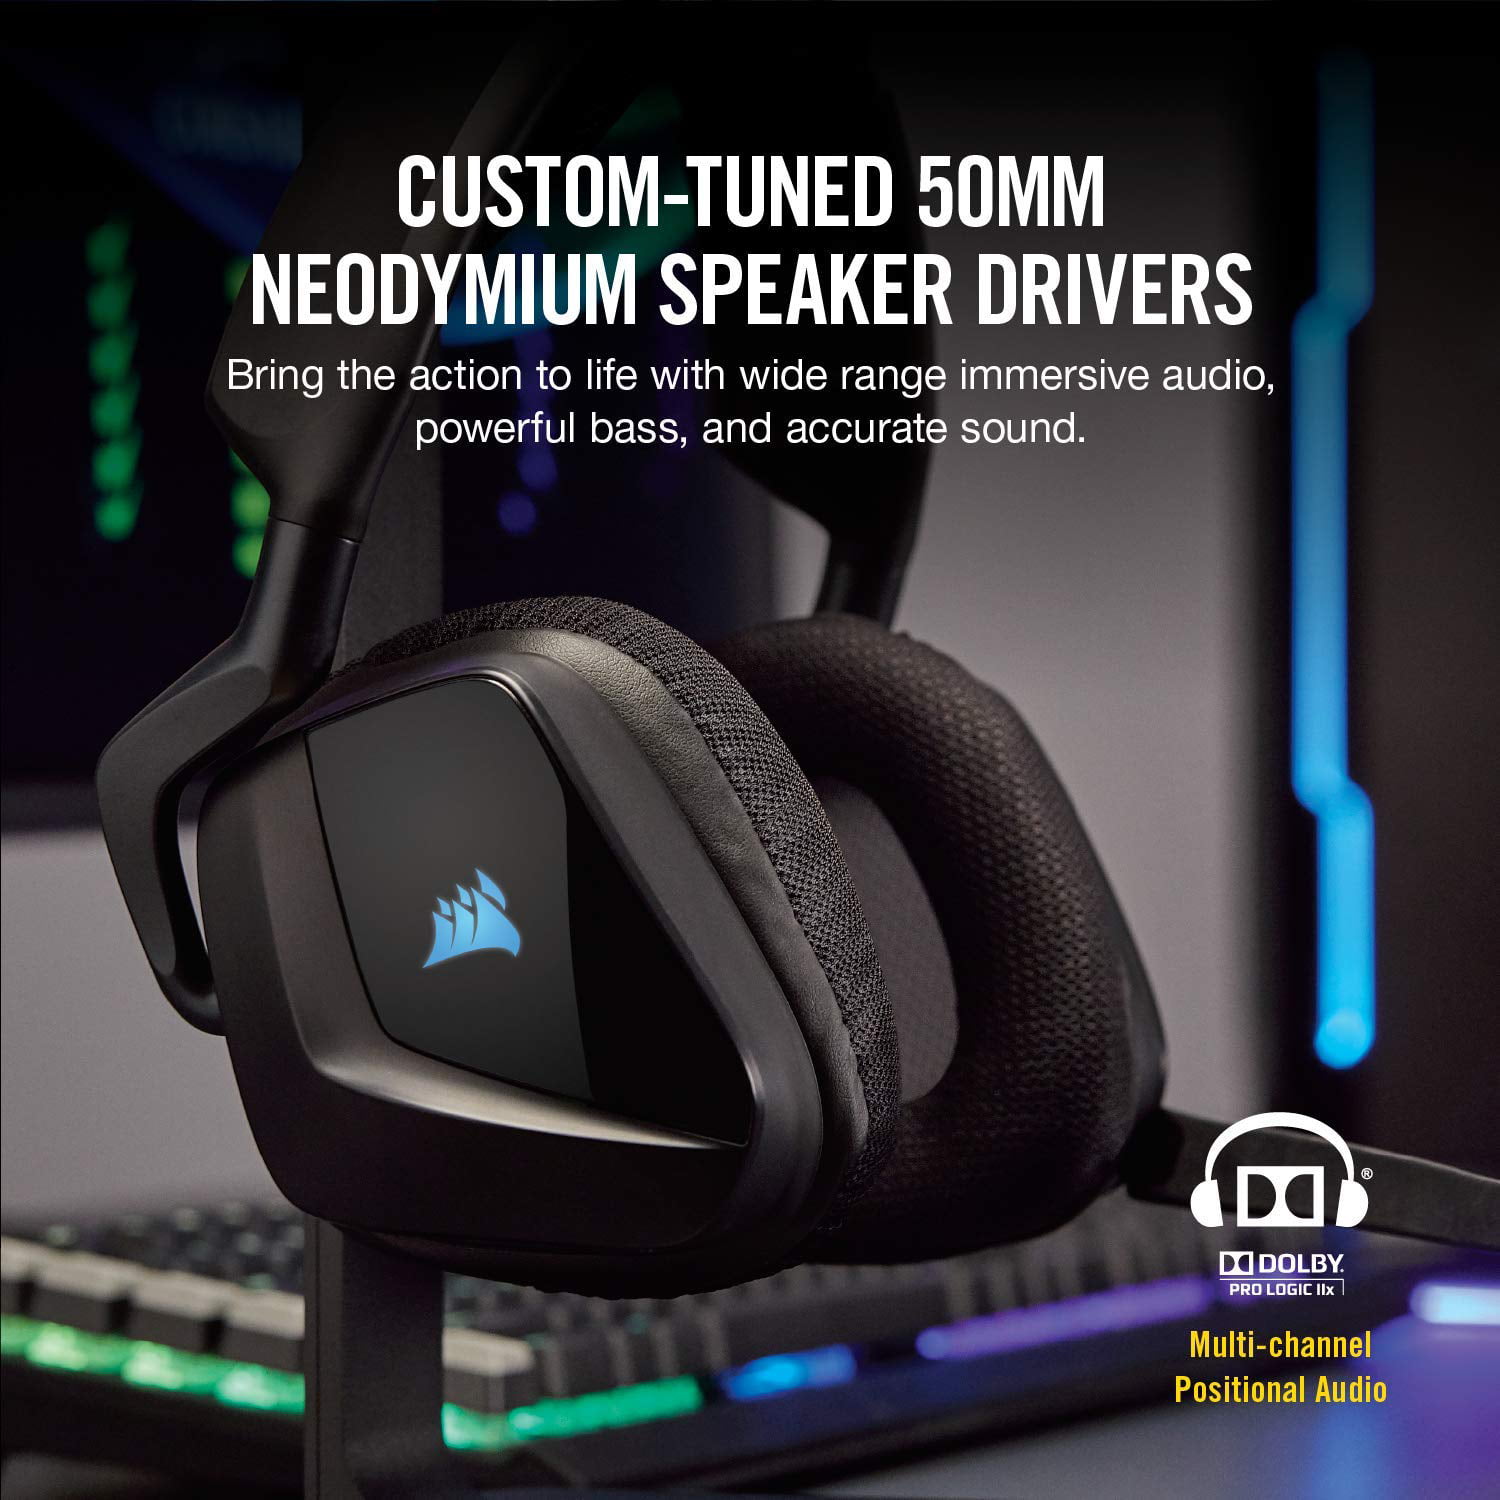 CORSAIR Void PRO RGB Wireless Headset - Dolby 7.1 Surround Sound Headphones for PC - Discord Certified - 50mm Drivers - Carbon - Walmart.com